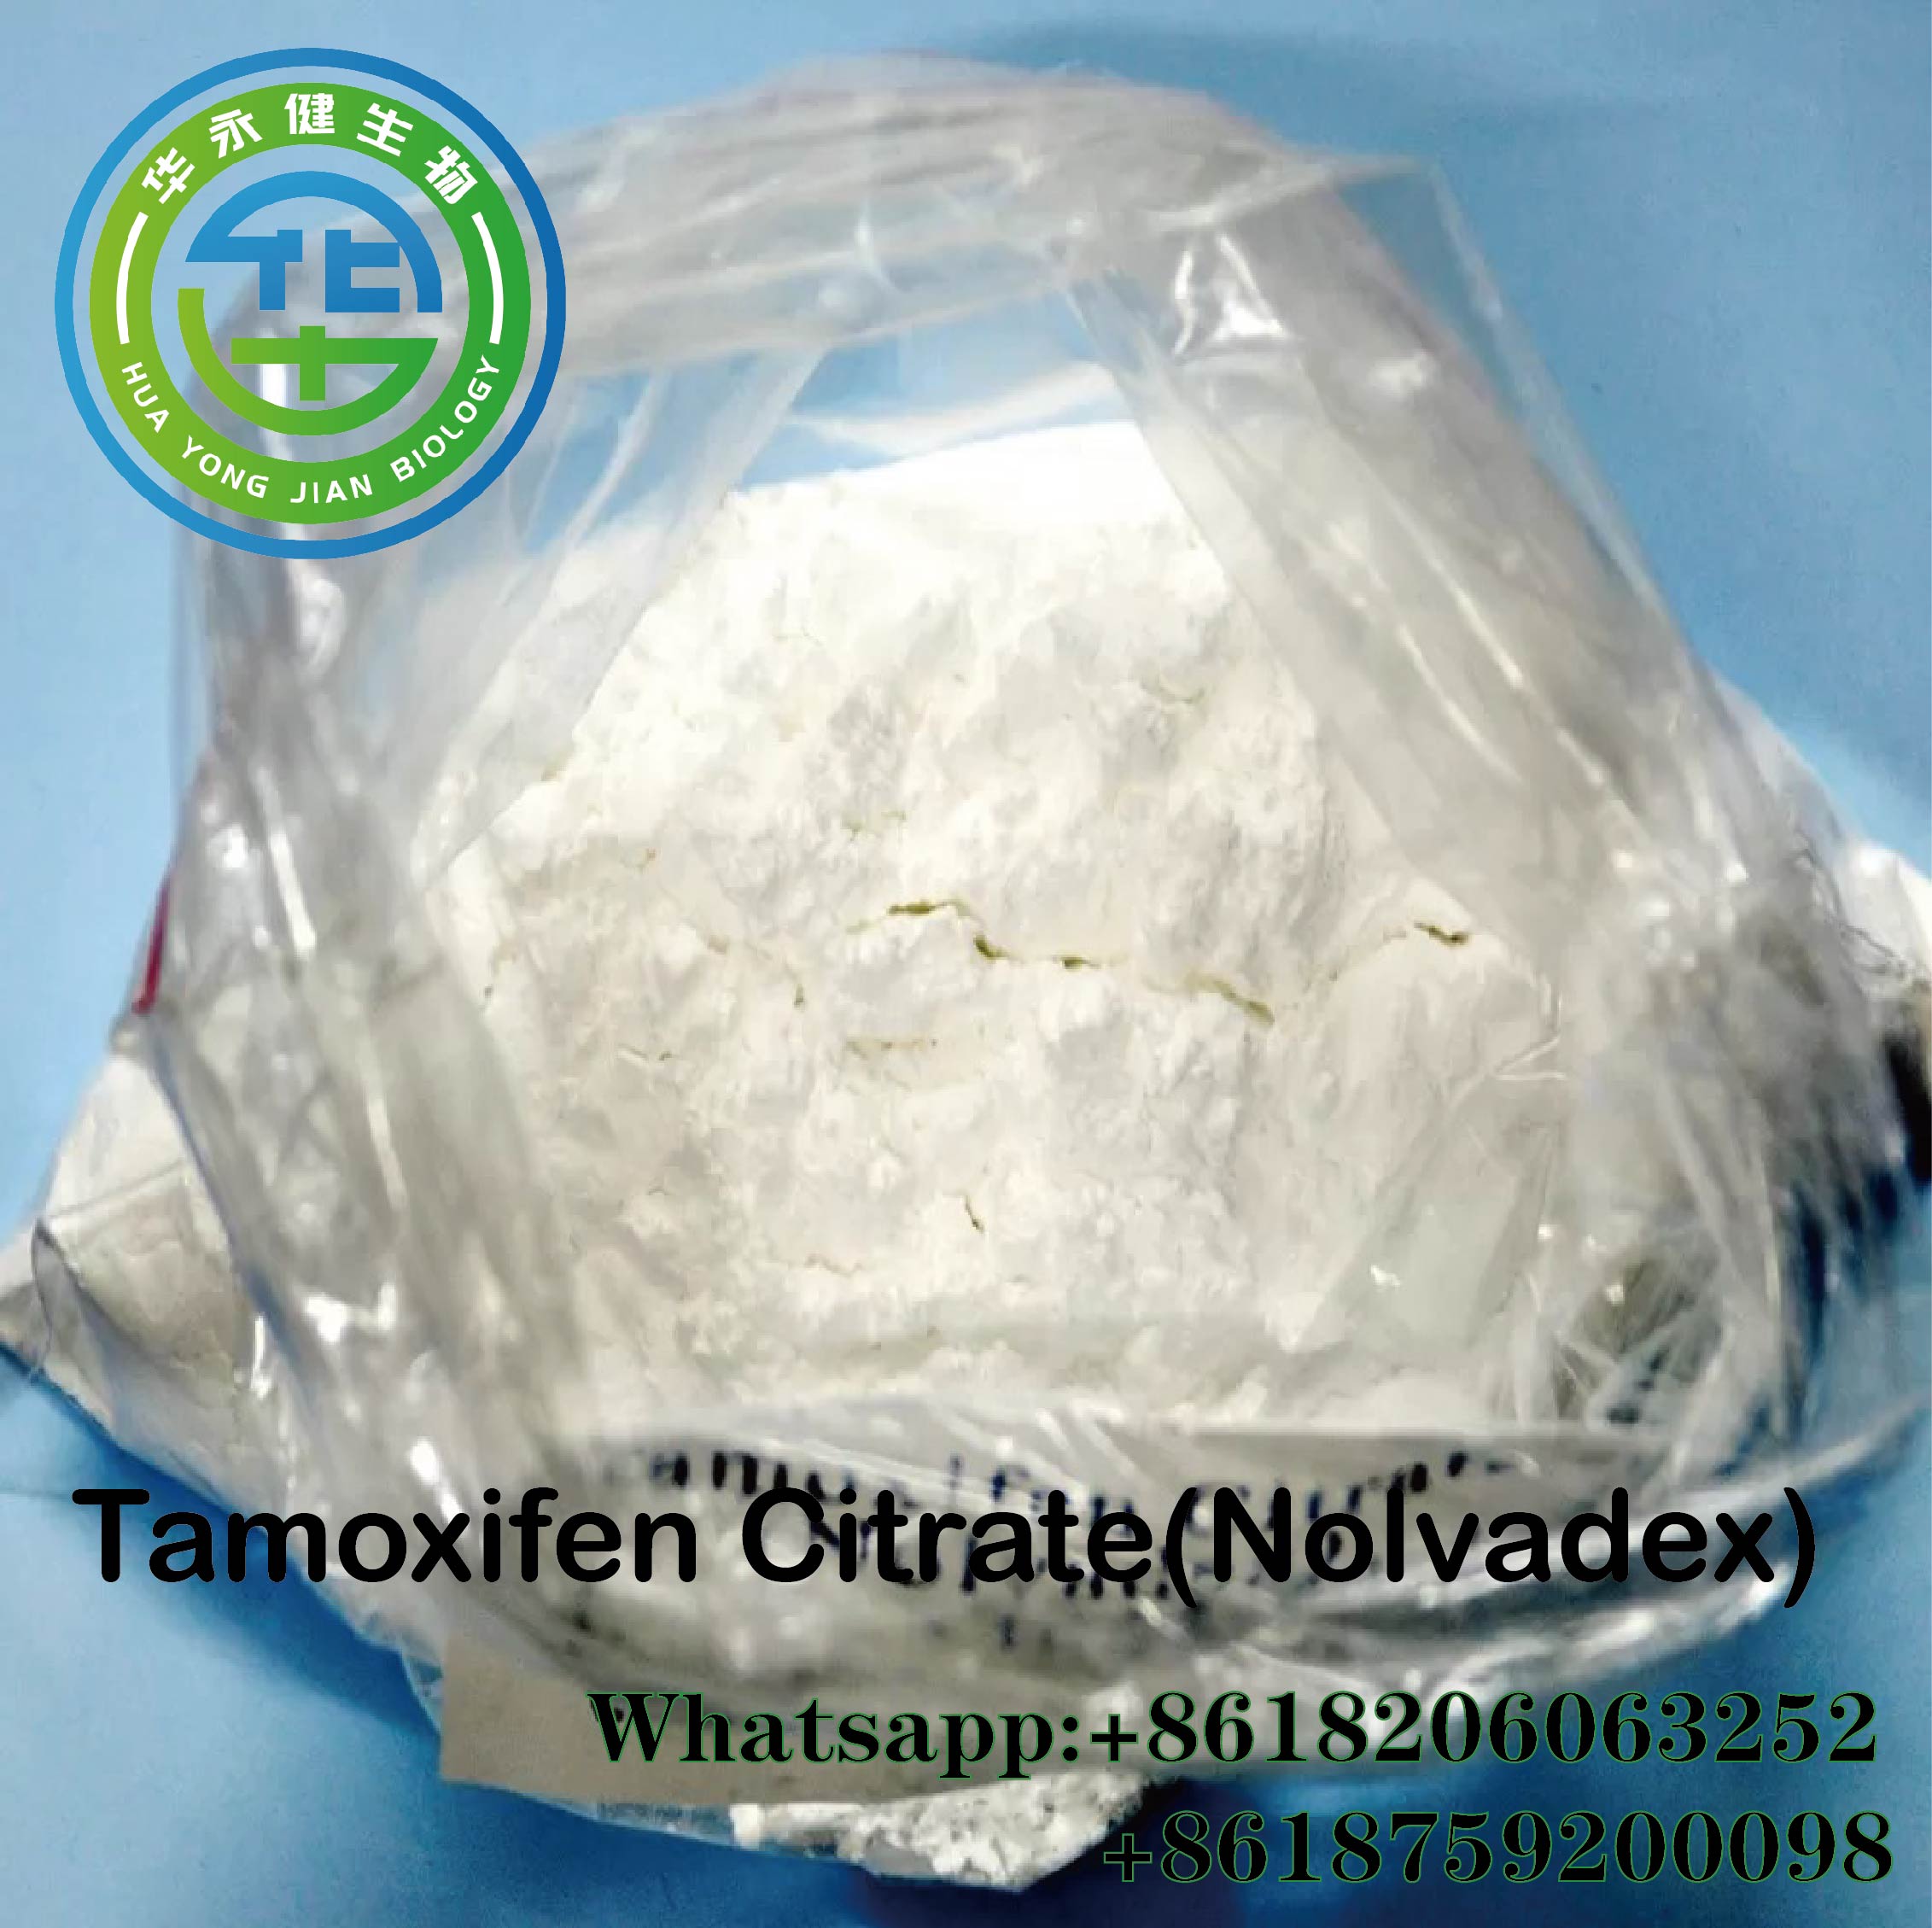 Safe Tamoxifen Citrate Oral Antiestrogen CAS: 54965-24-1 Steroids Powder Without Side Effects 